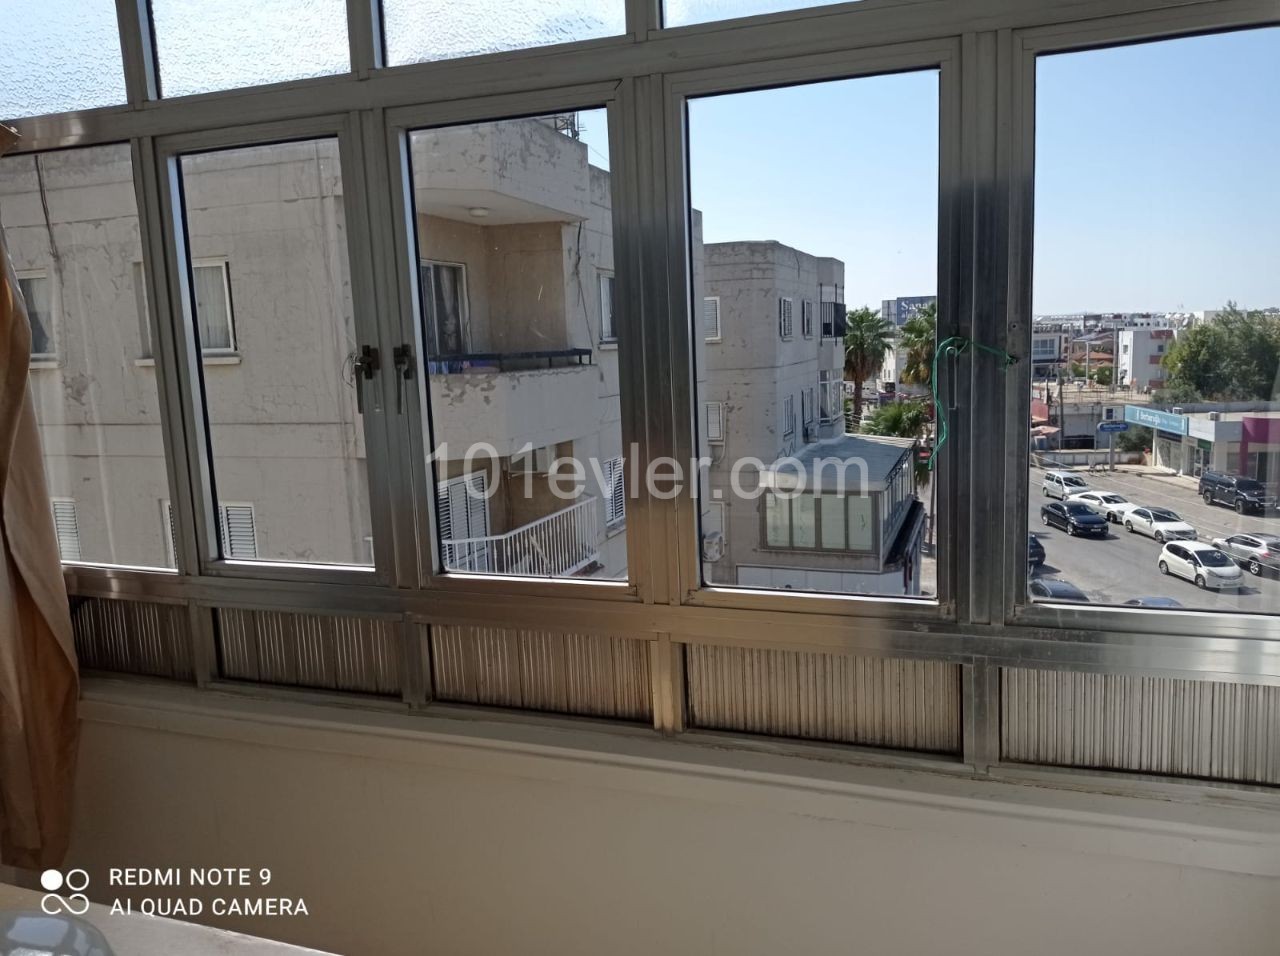 Apartment for sale in Ortaköy in the center of commercial leave